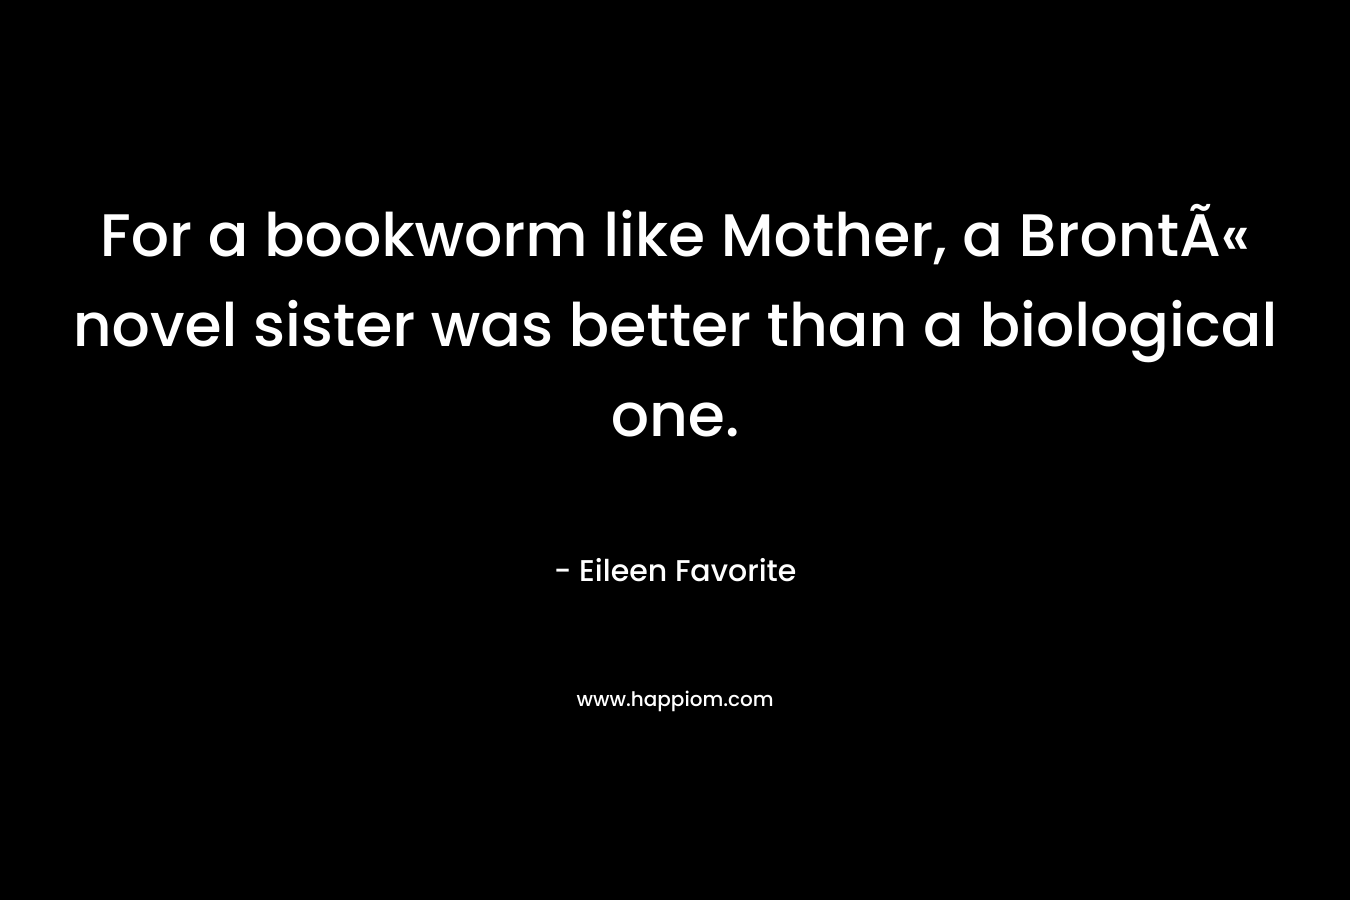 For a bookworm like Mother, a BrontÃ« novel sister was better than a biological one. – Eileen Favorite